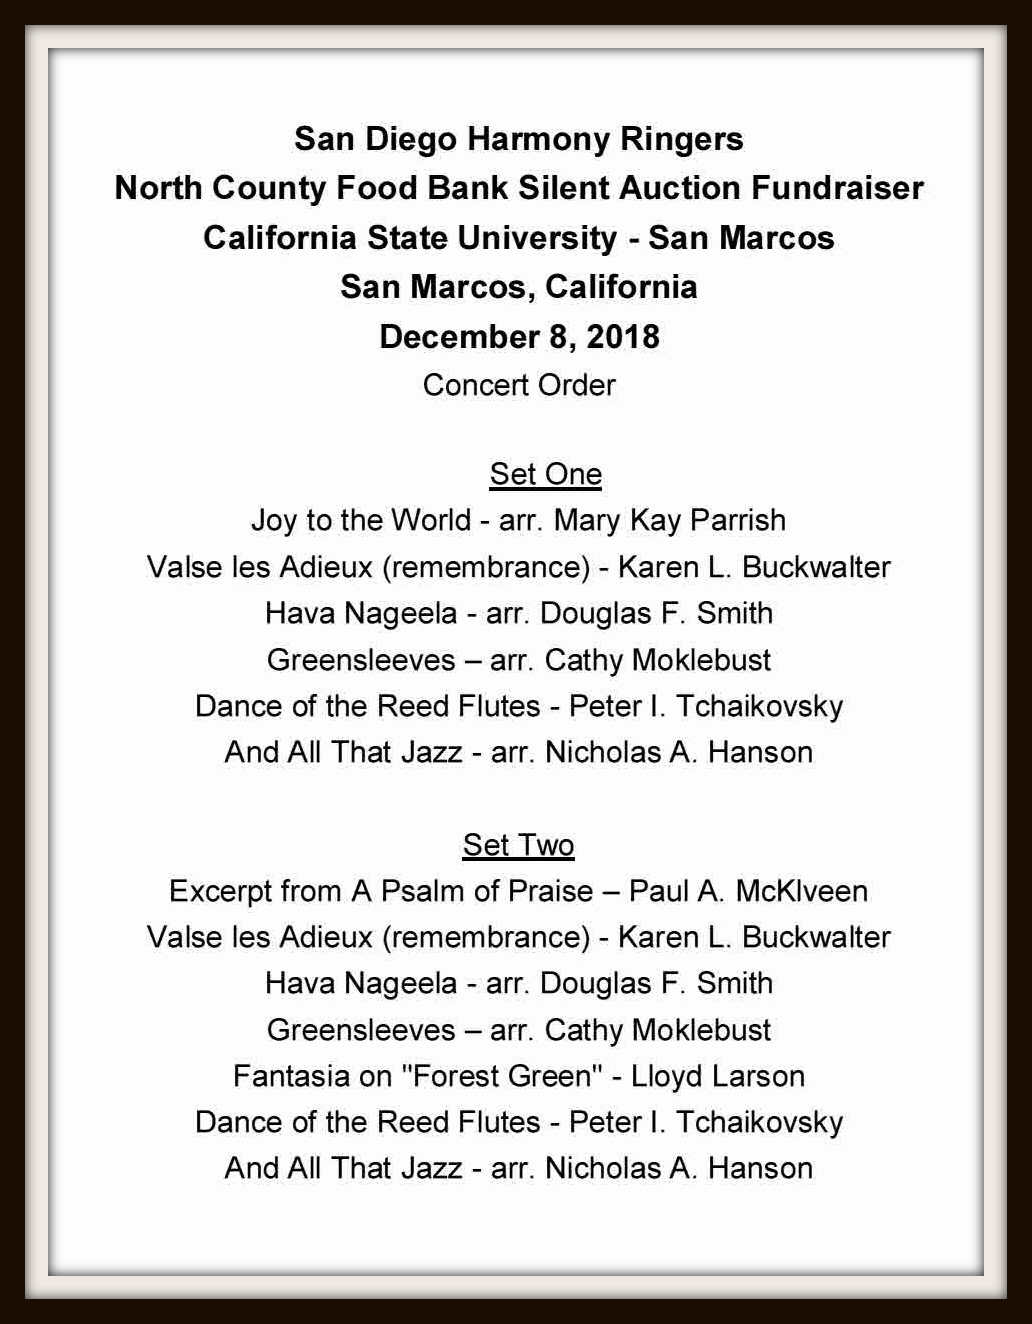 REV North County Food Bank Silent Auction Fundraiser CONCERT ORDER